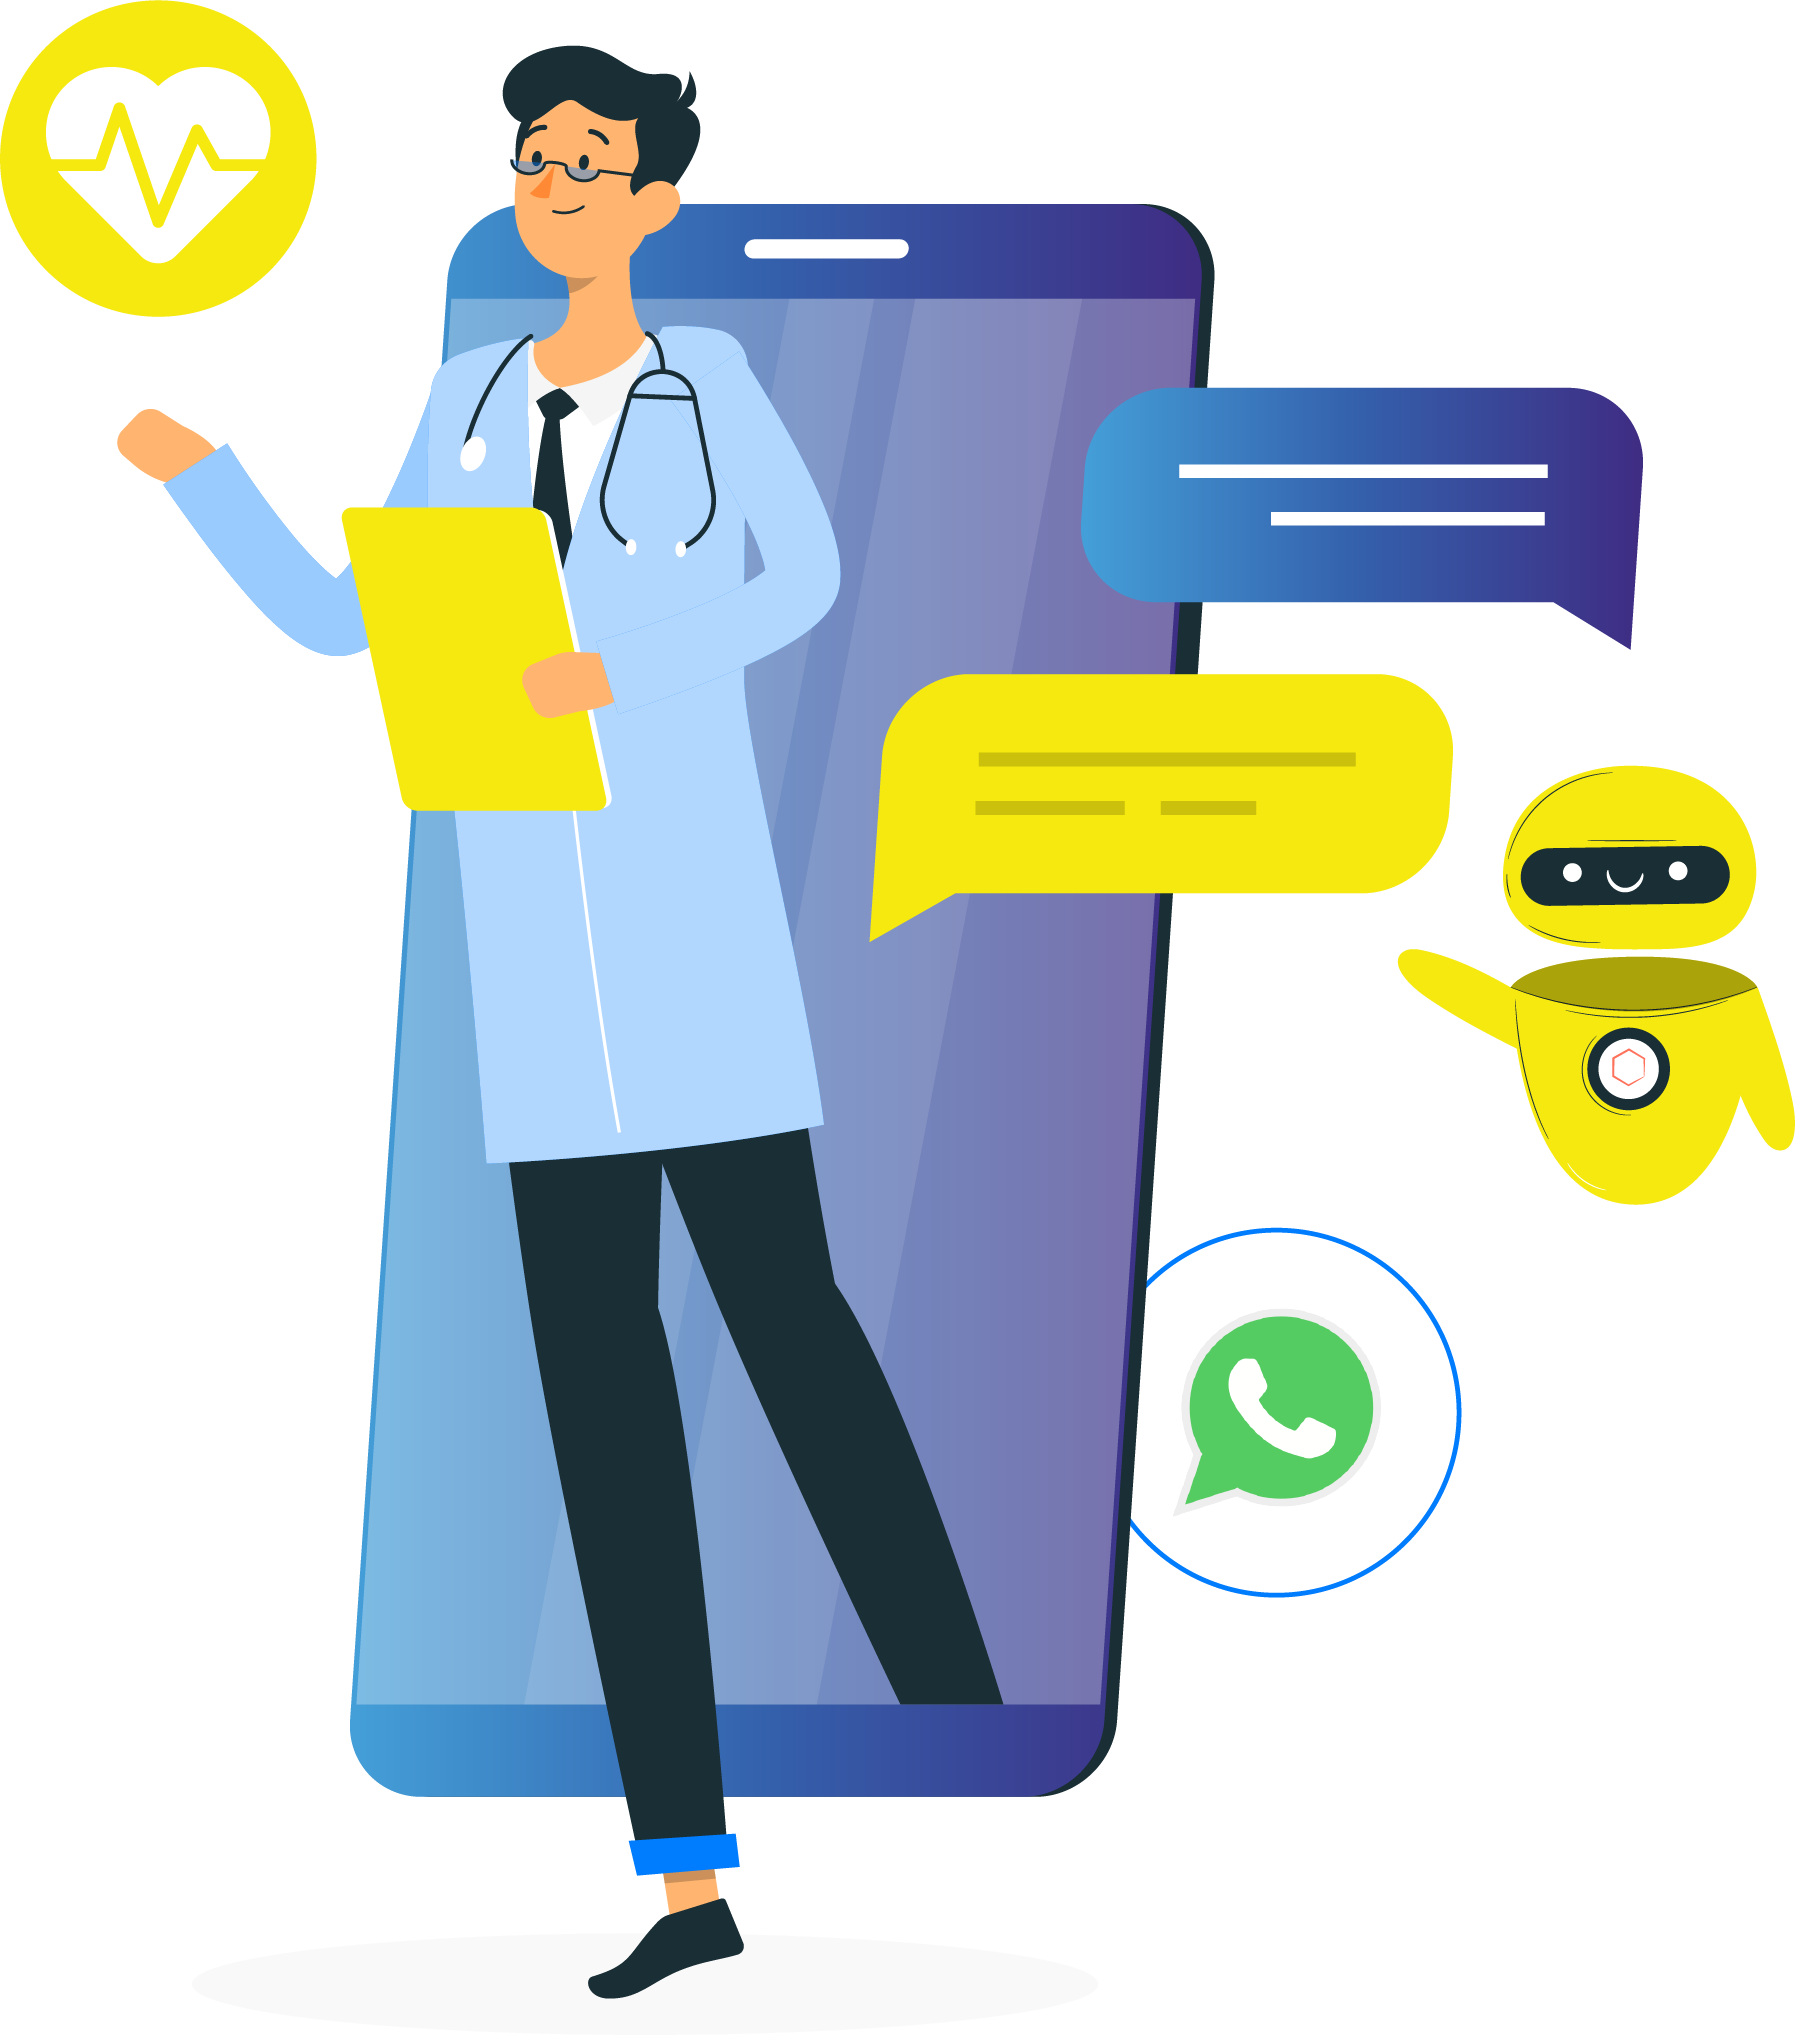 WhatsApp Chatbot for Hospitals and Healthcare Institutions